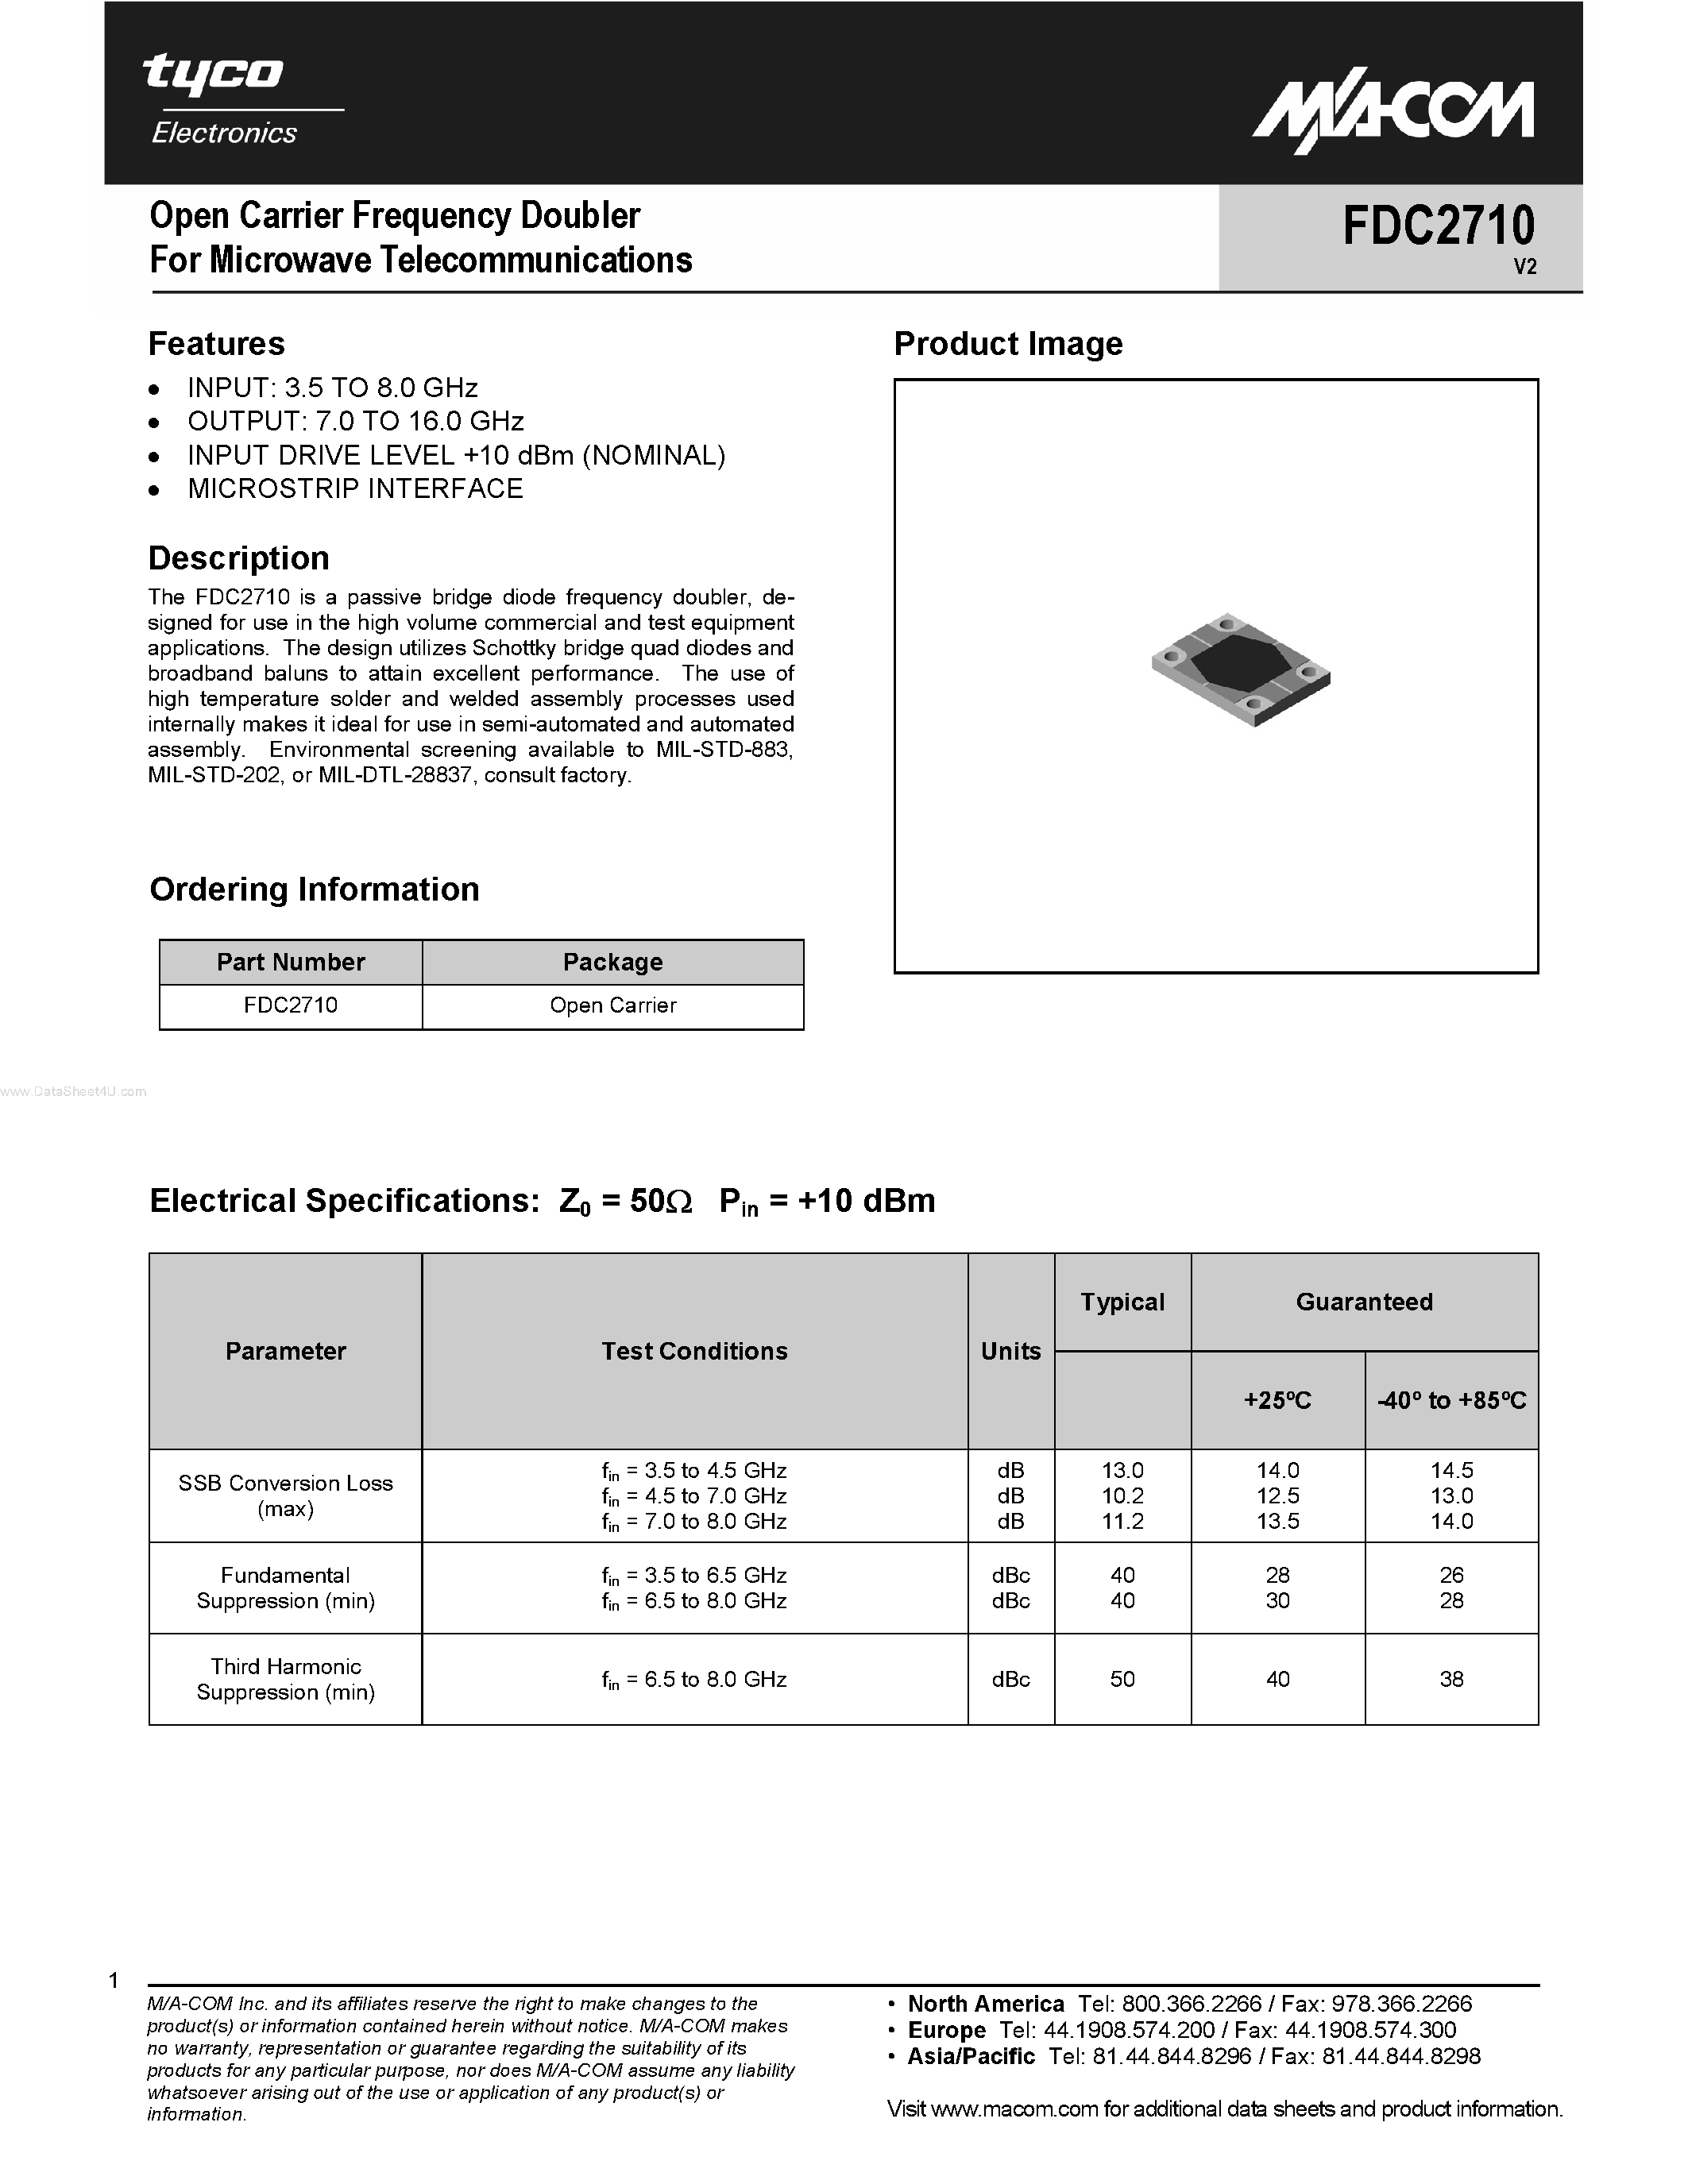 Datasheet FDC2710 - Open Carrier Frequency Doubler page 1